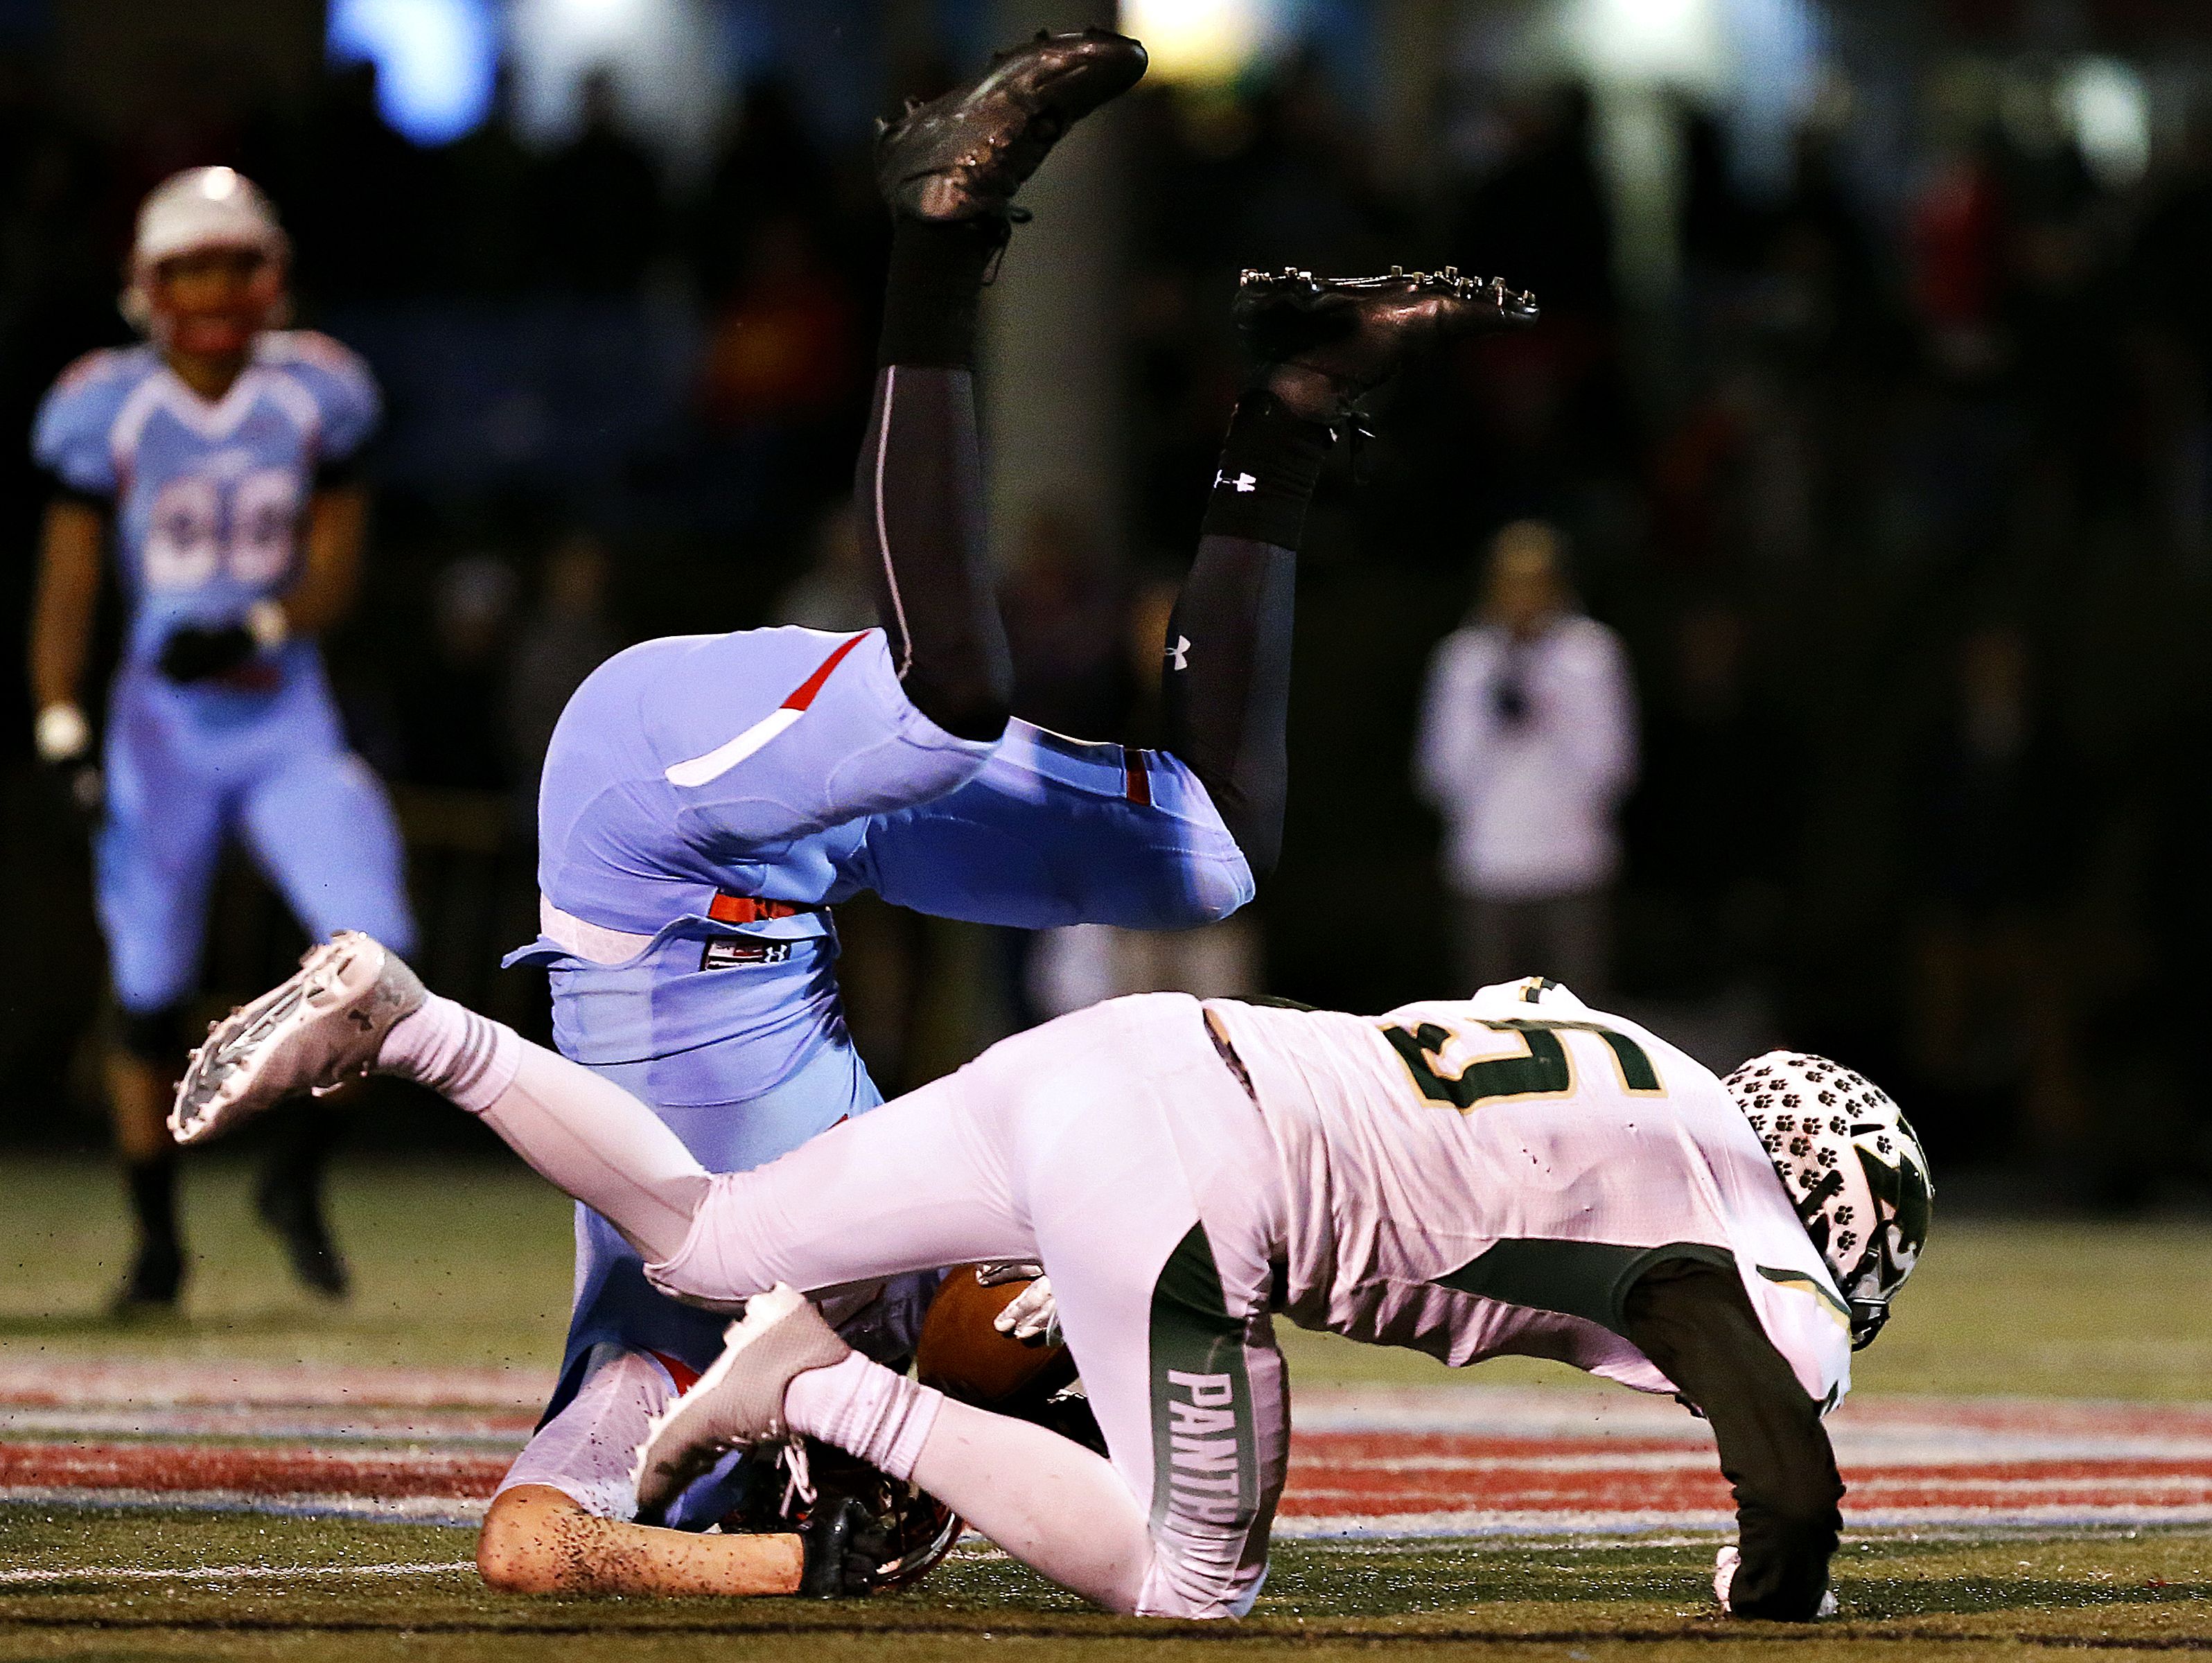 Glendale High School wide receiver Spencer Wester (2) is upended by Panthers defensive backs Jack Ederer (5) and Jacob Triplett (21) during second quarter action of the playoff game between Glendale High School and Ft. Zumwalt North High School held at Lowe Stadium in Springfield, Mo. on Nov. 11, 2016.